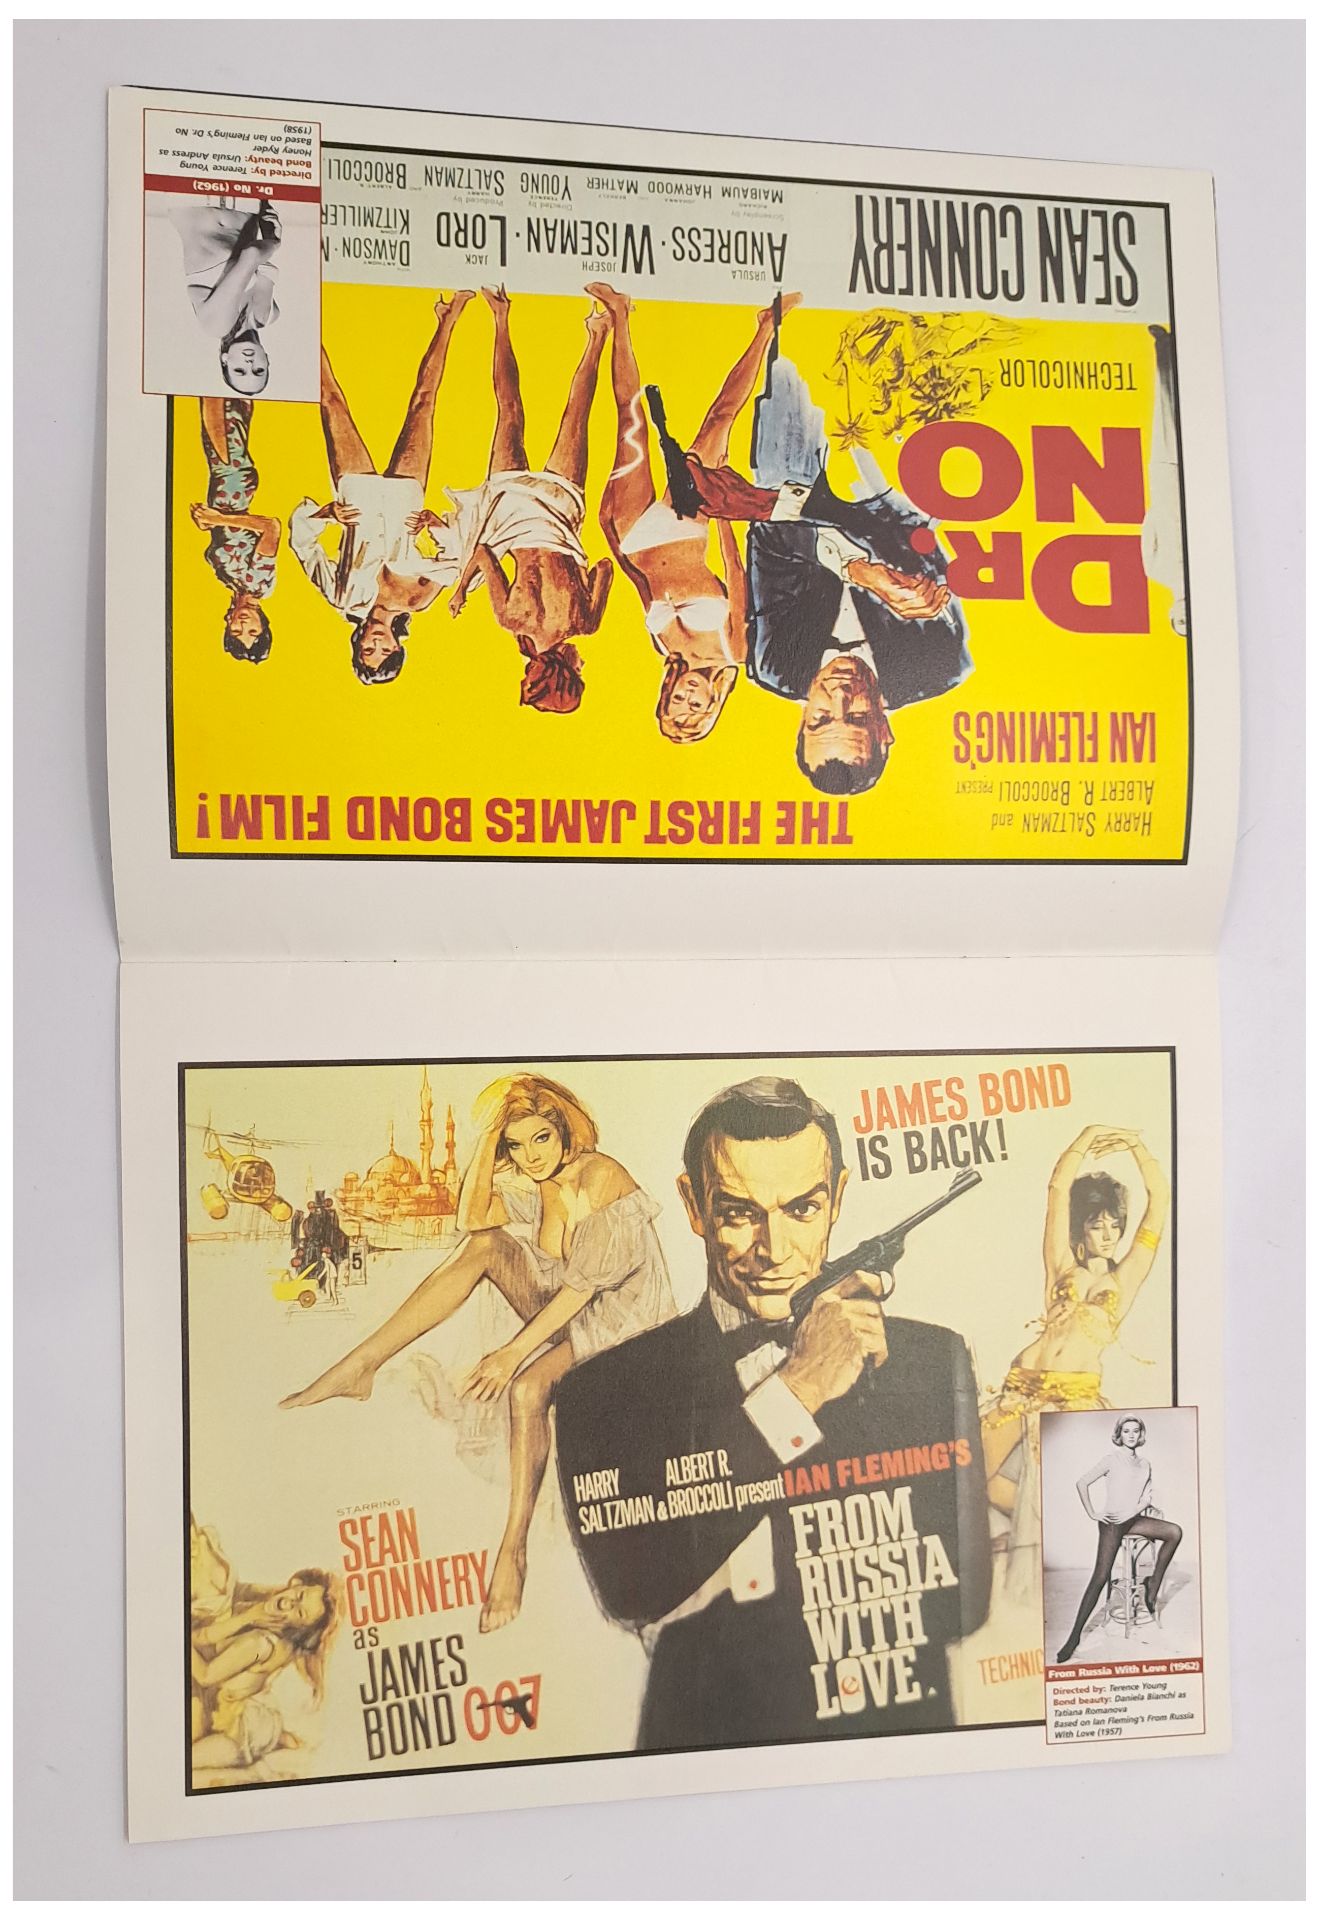 James Bond 007 The Man with the Golden Gun Lobby Cards/Stills & The Complete James Bond Poster Co... - Image 2 of 3